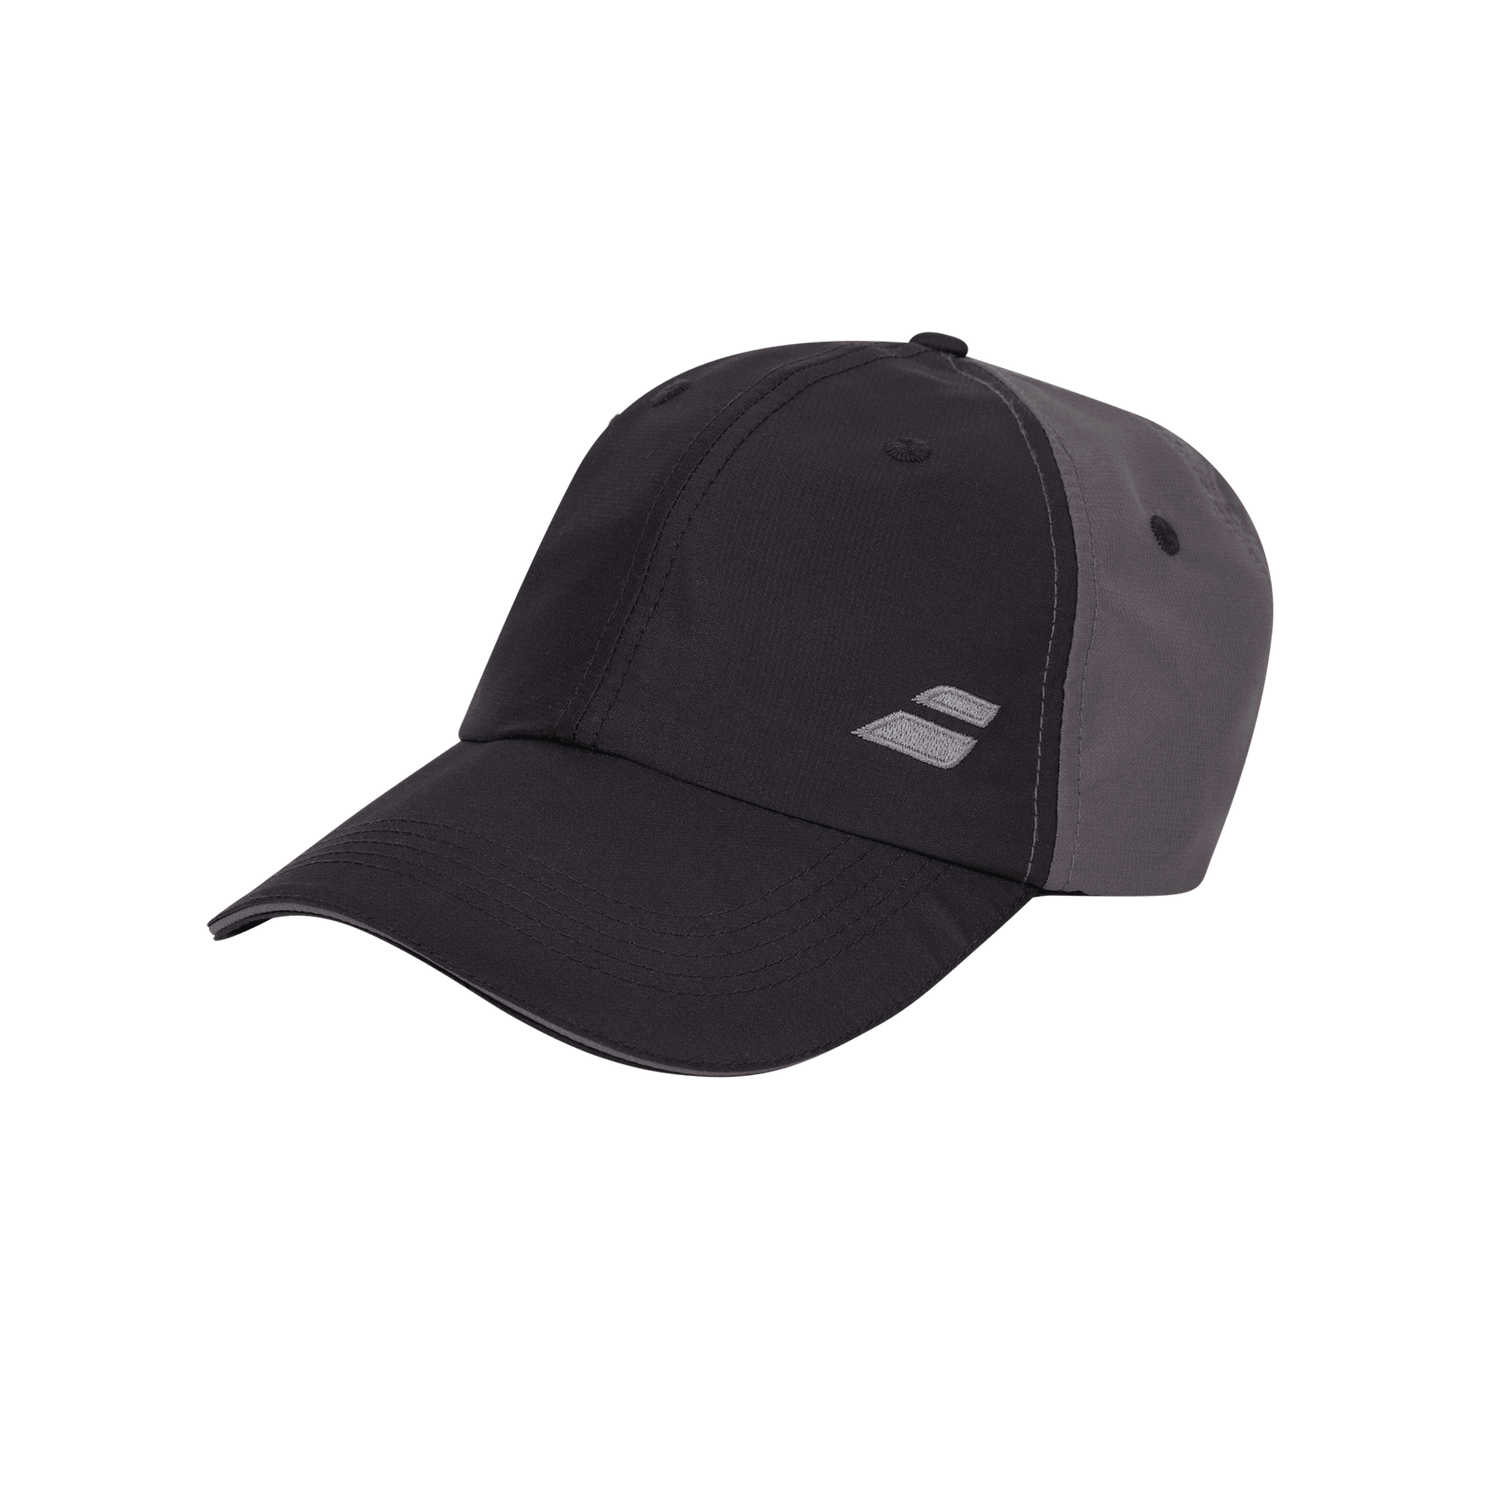 Babolat hat, perfect for tennis, pickleball and padel